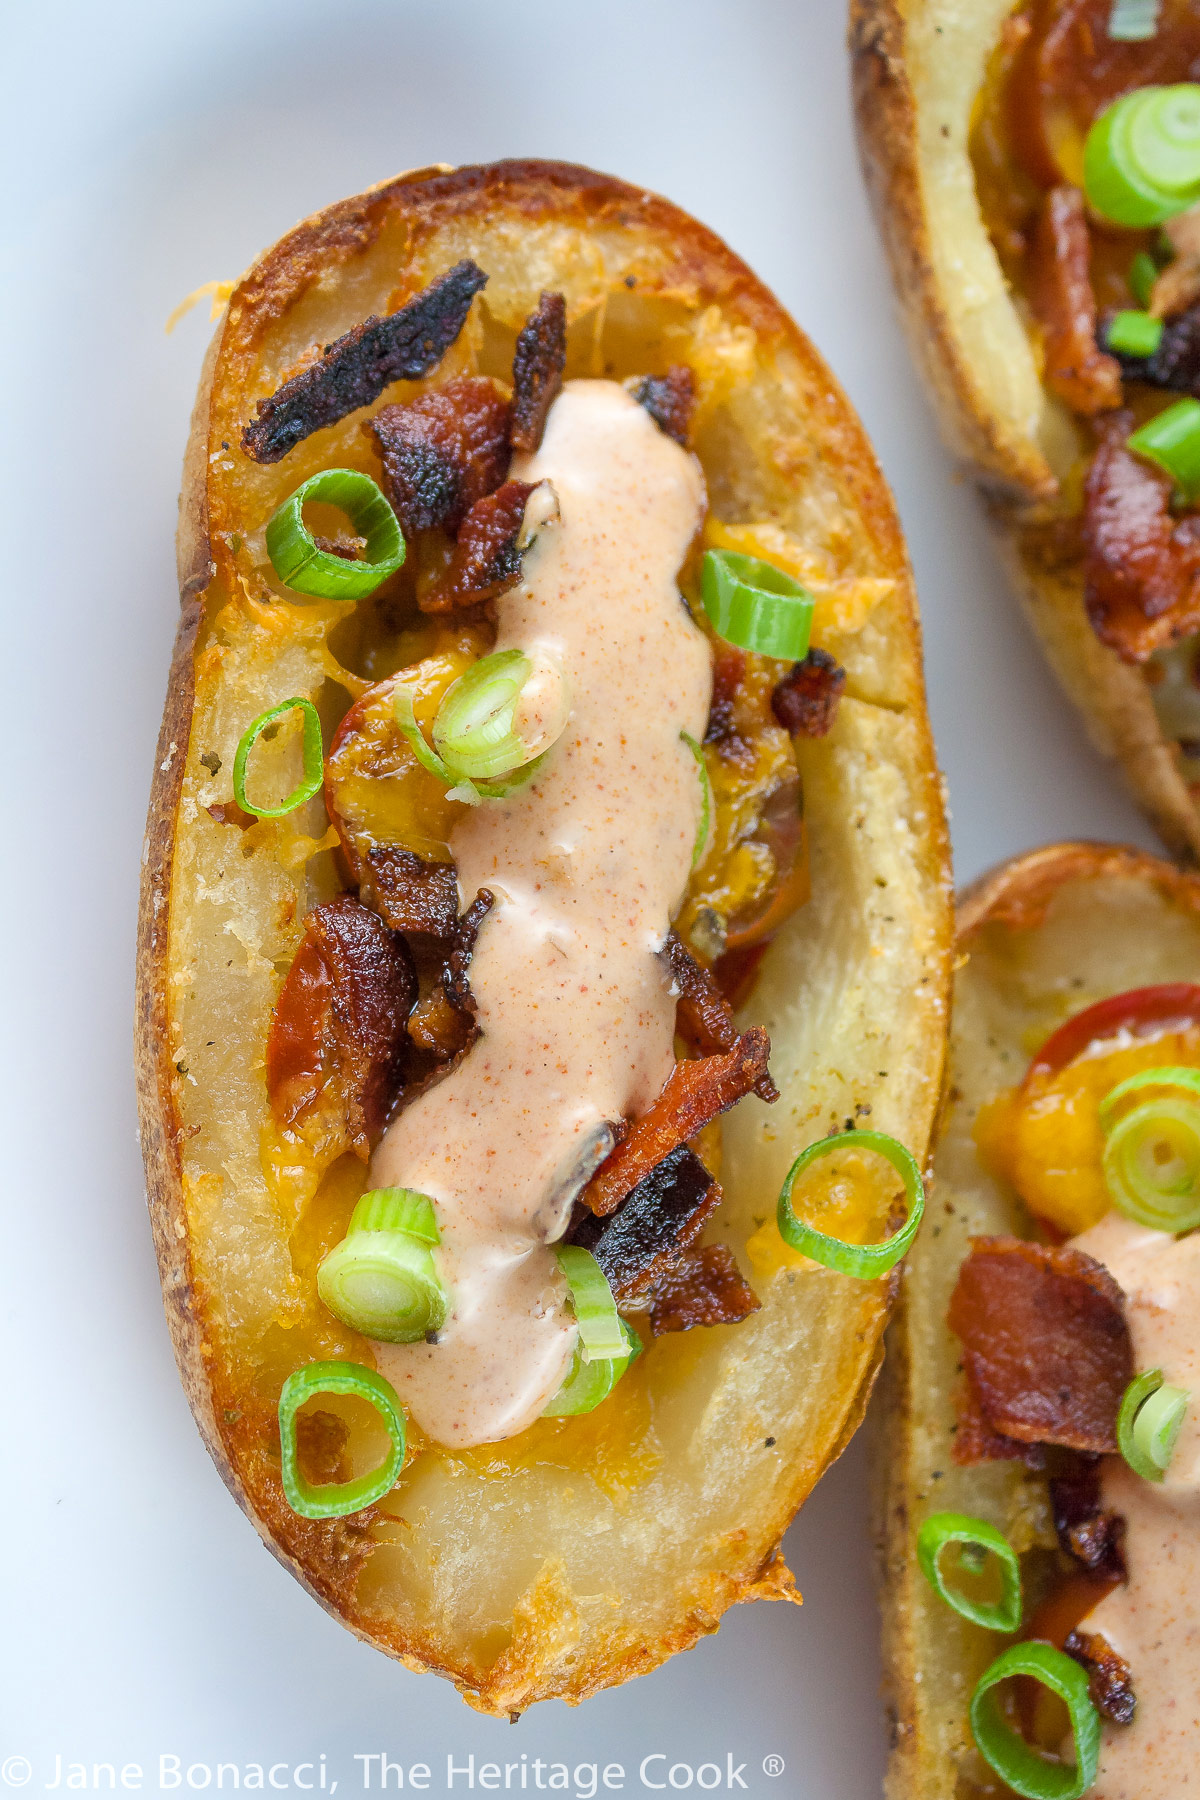 Baked potatoes are split lengthwise with the centers hollowed out and filled with crumbled bacon, green chiles, tomatoes, and melted cheese. Topped with green onions and a drizzle of taco cream. Served with lime wedges. © 2023 Jane Bonacci, The Heritage Cook. 